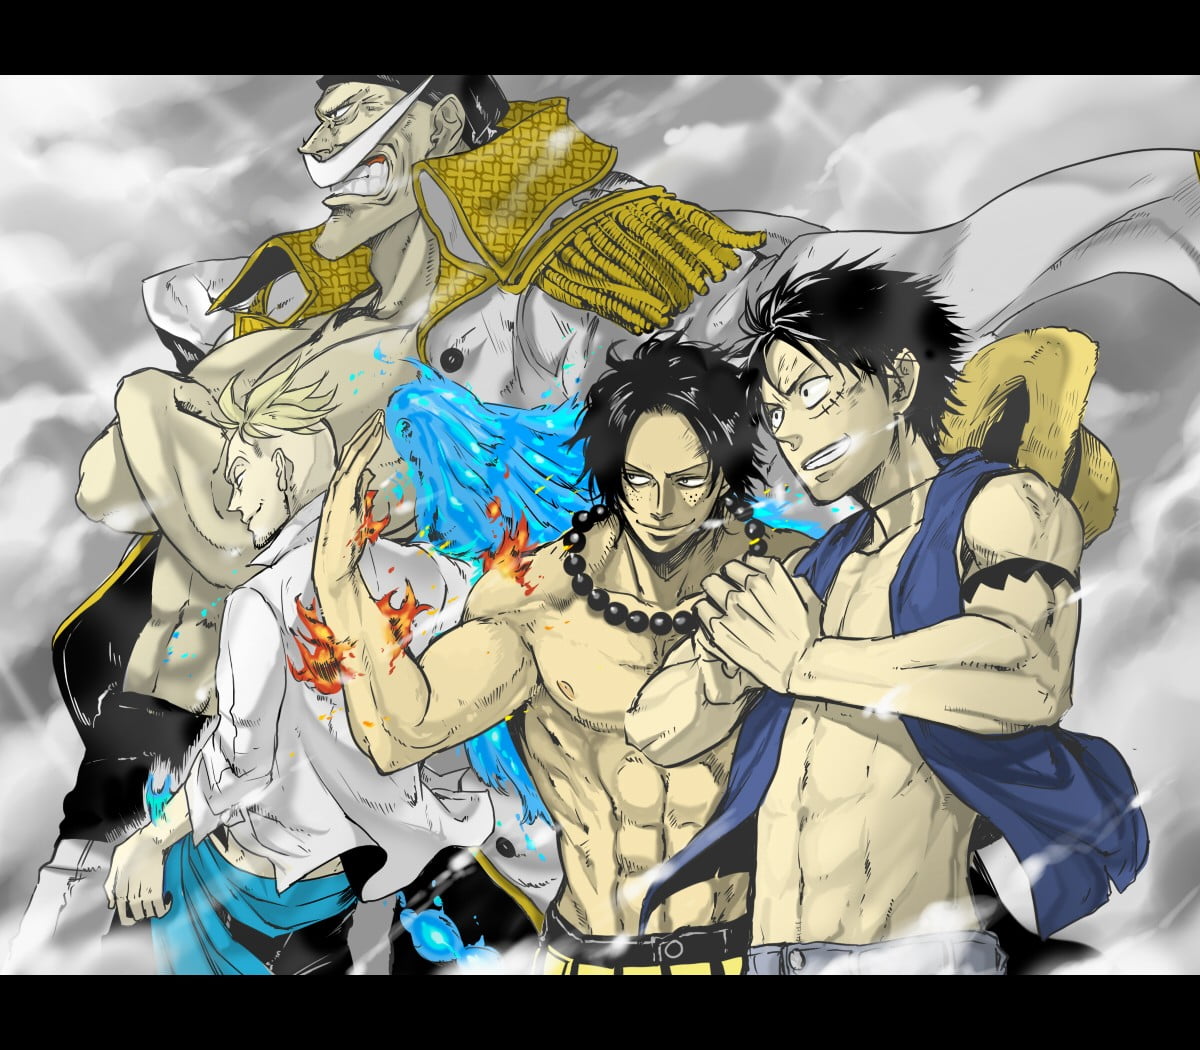 Straw Hat Luffy and Gol D Ace, Portgas D. Ace, One Piece, hat, fire